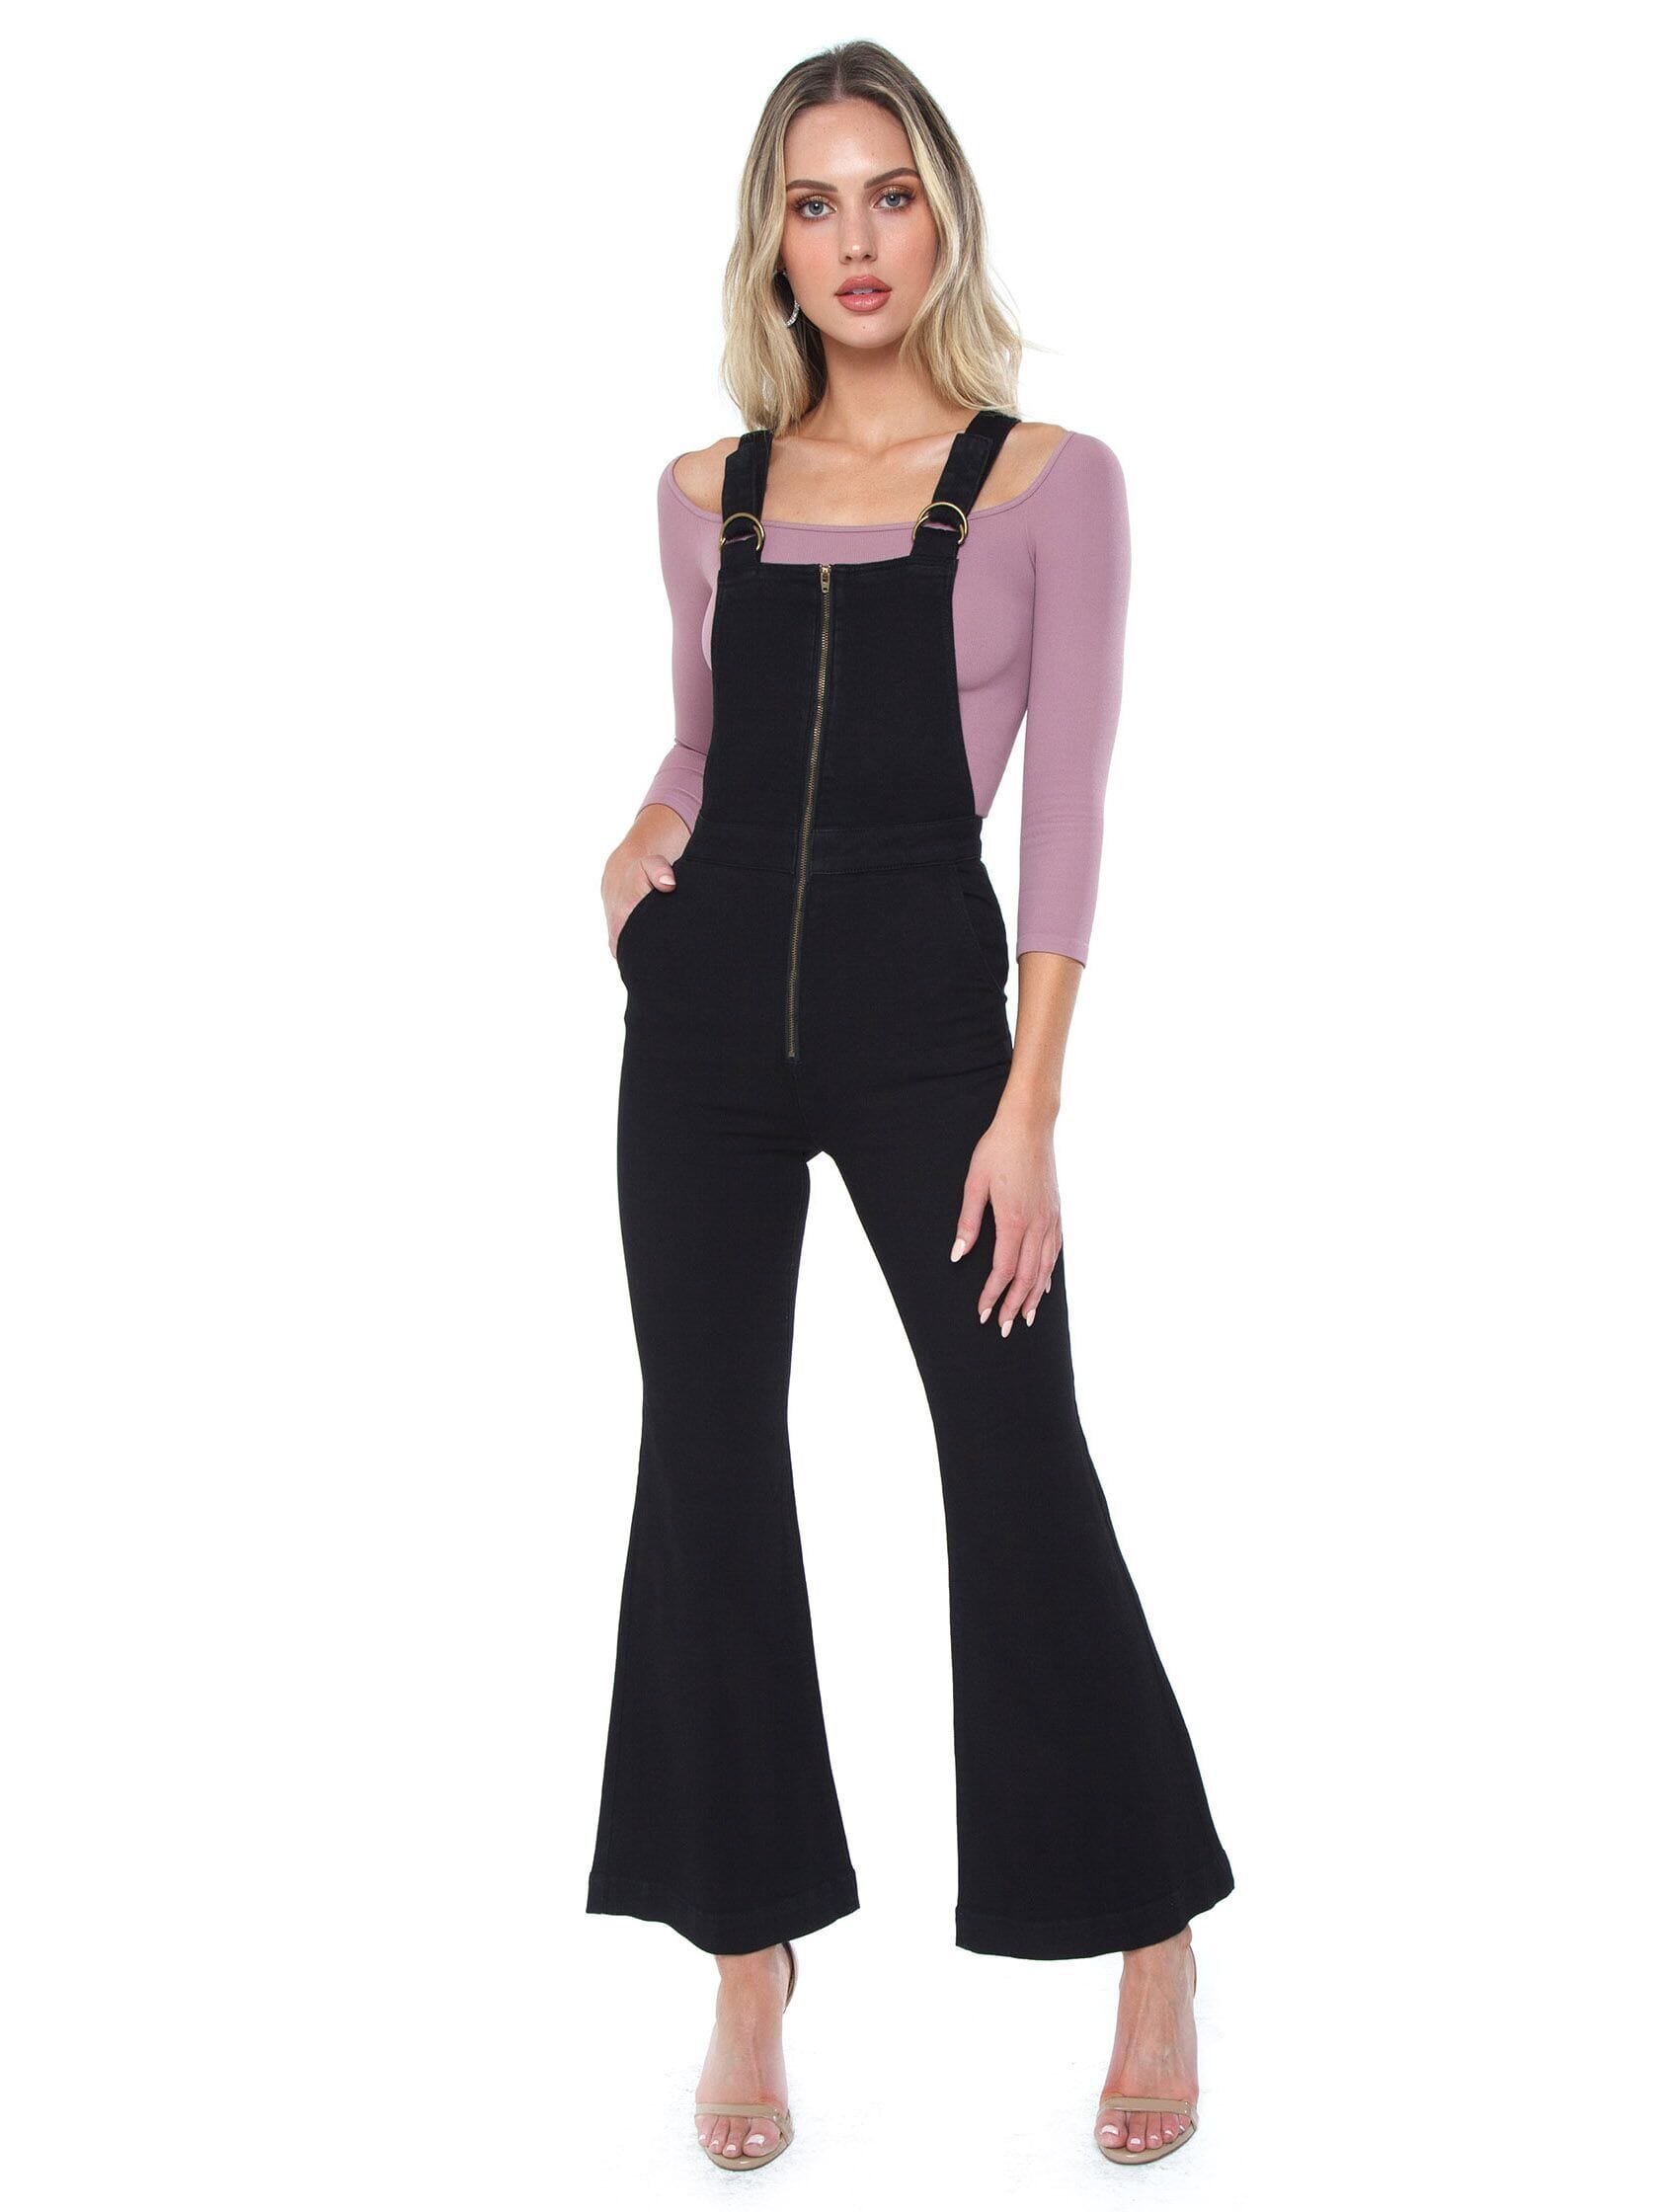 ROLLAS East Coast Flare Overall in Galaxy Black